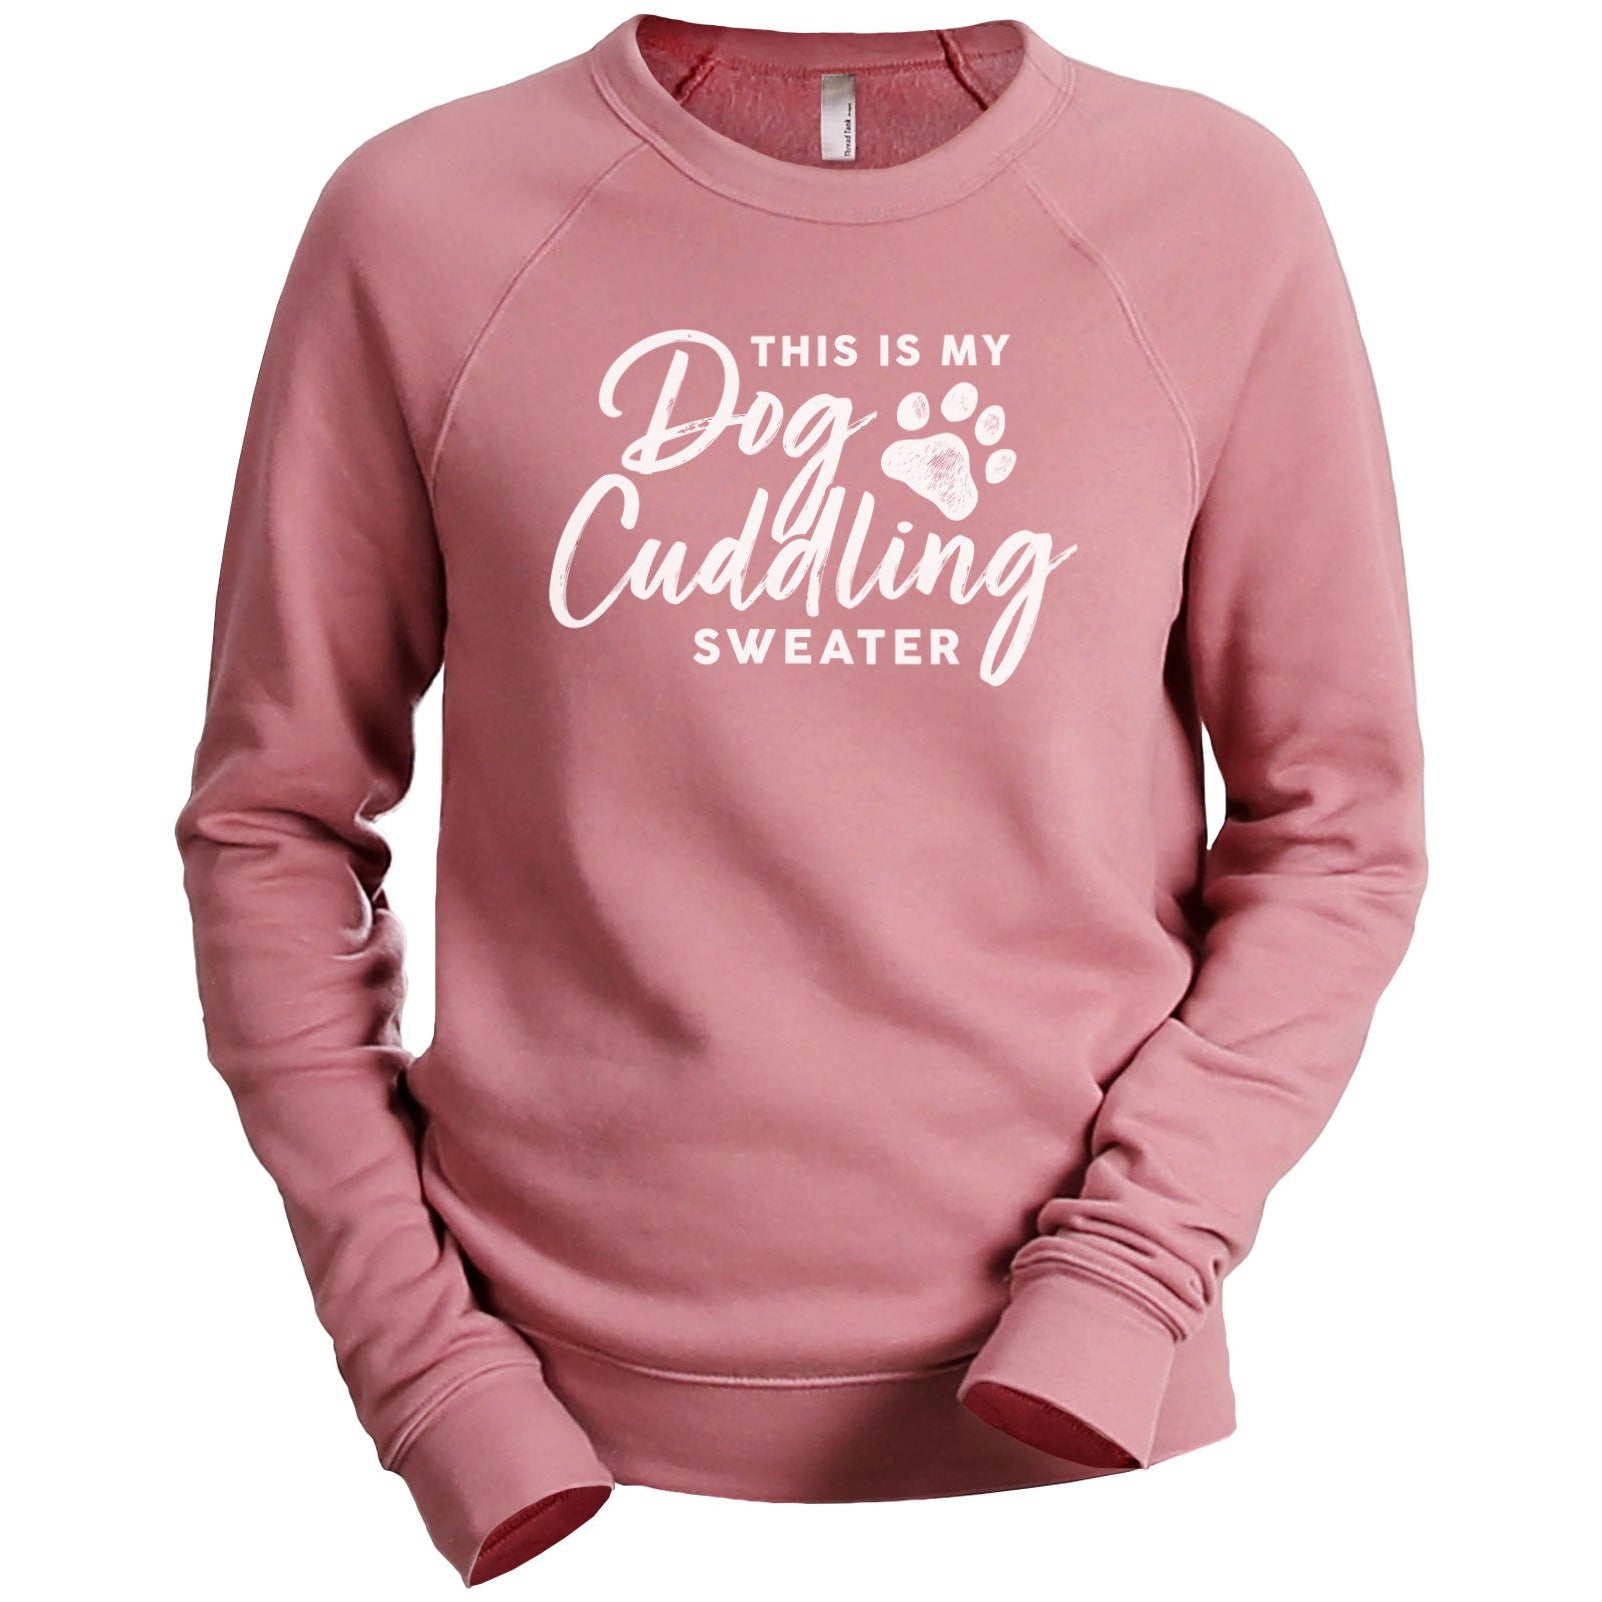 This Is My Dog Cuddling Sweater - Stories You Can Wear